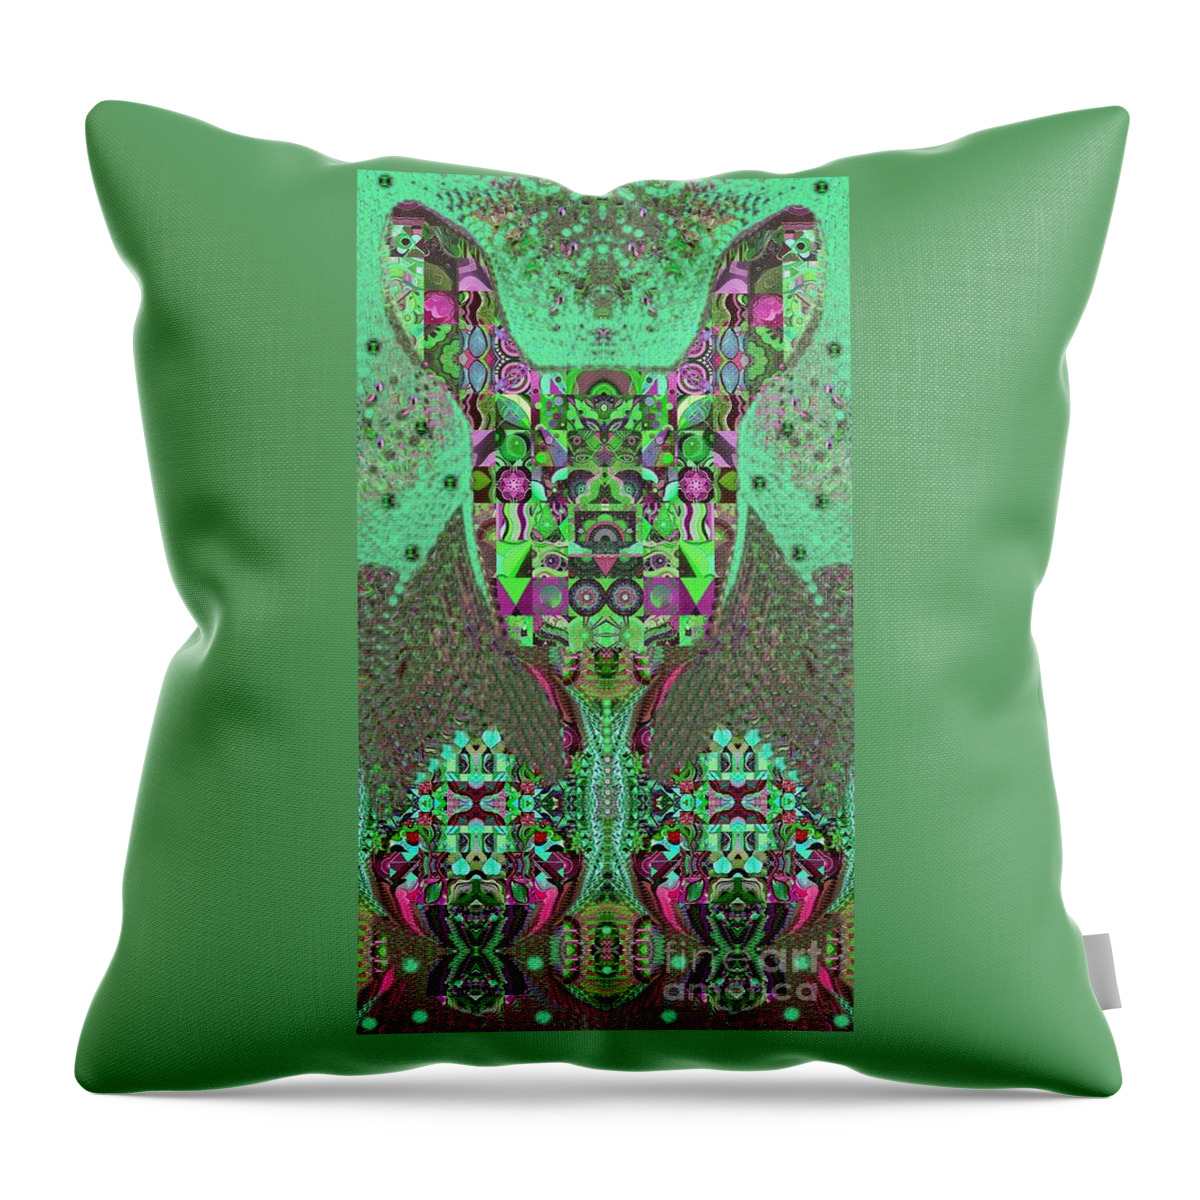 Tjod Wild Hare 3 Full Portrait By Helena Tiainen Throw Pillow featuring the painting TJOD Wild Hare 3 Full Portrait by Helena Tiainen